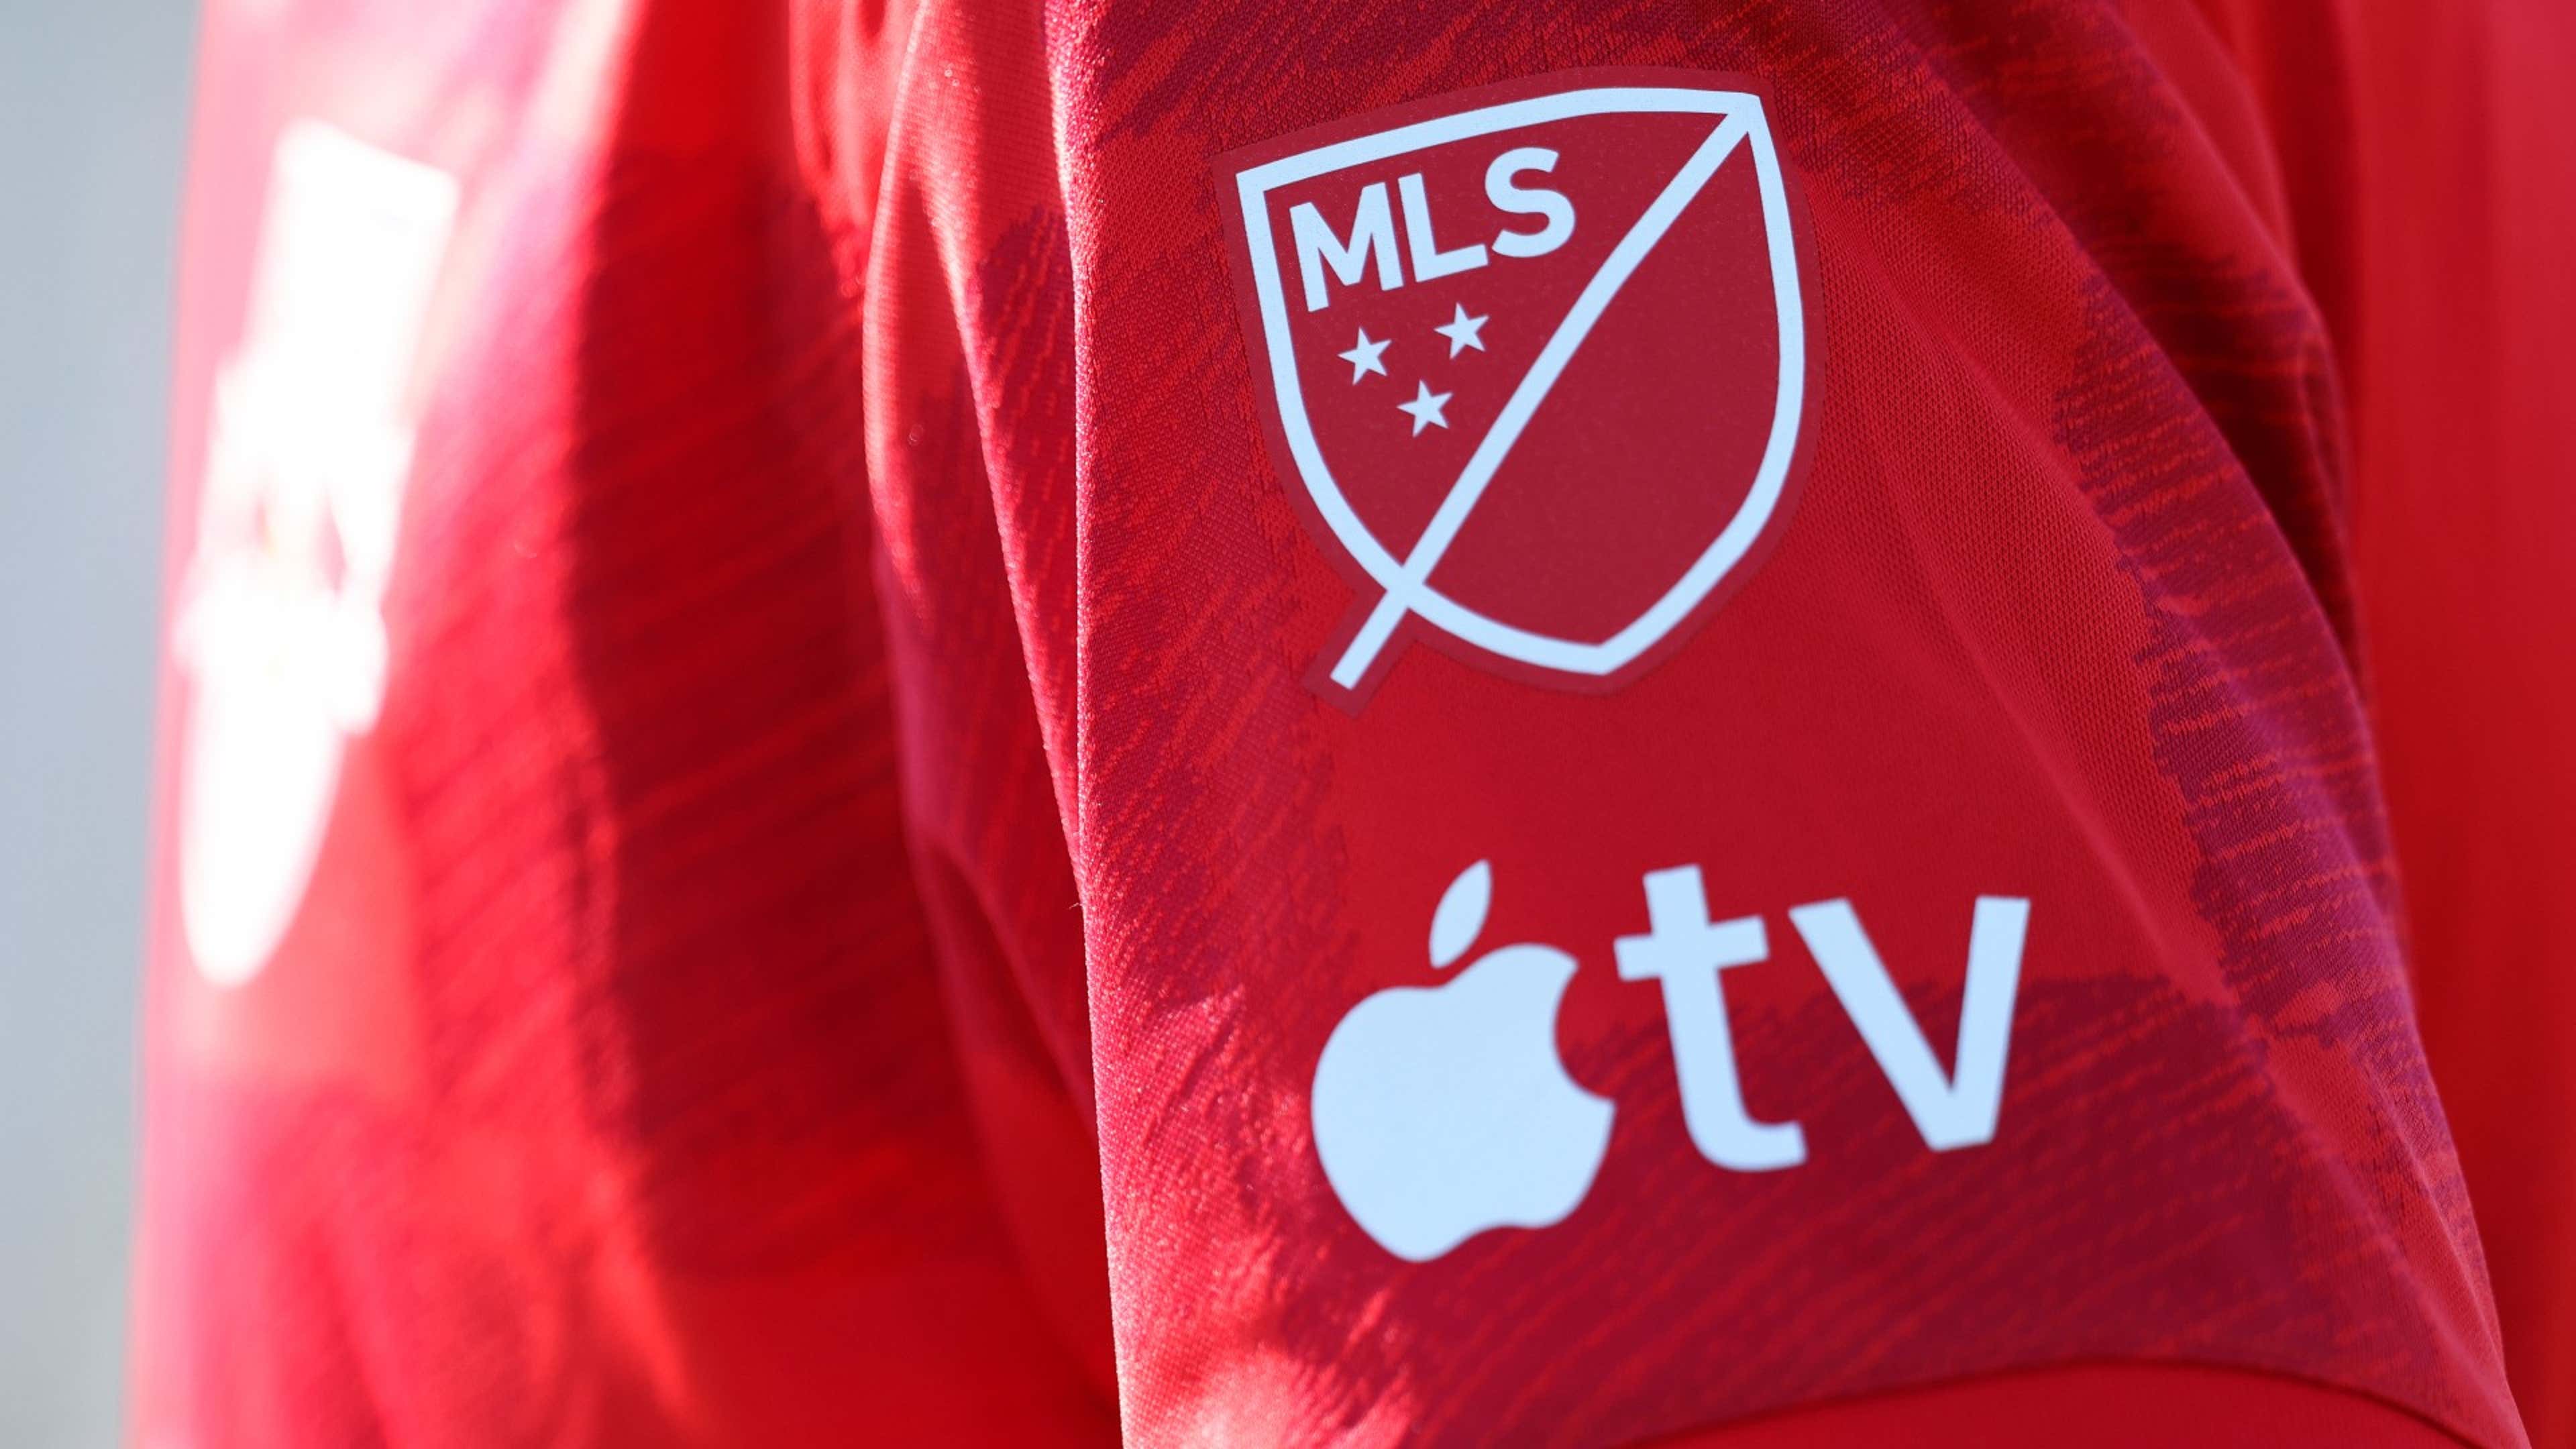 MLS All-Star Game live stream: TV channel, how to watch